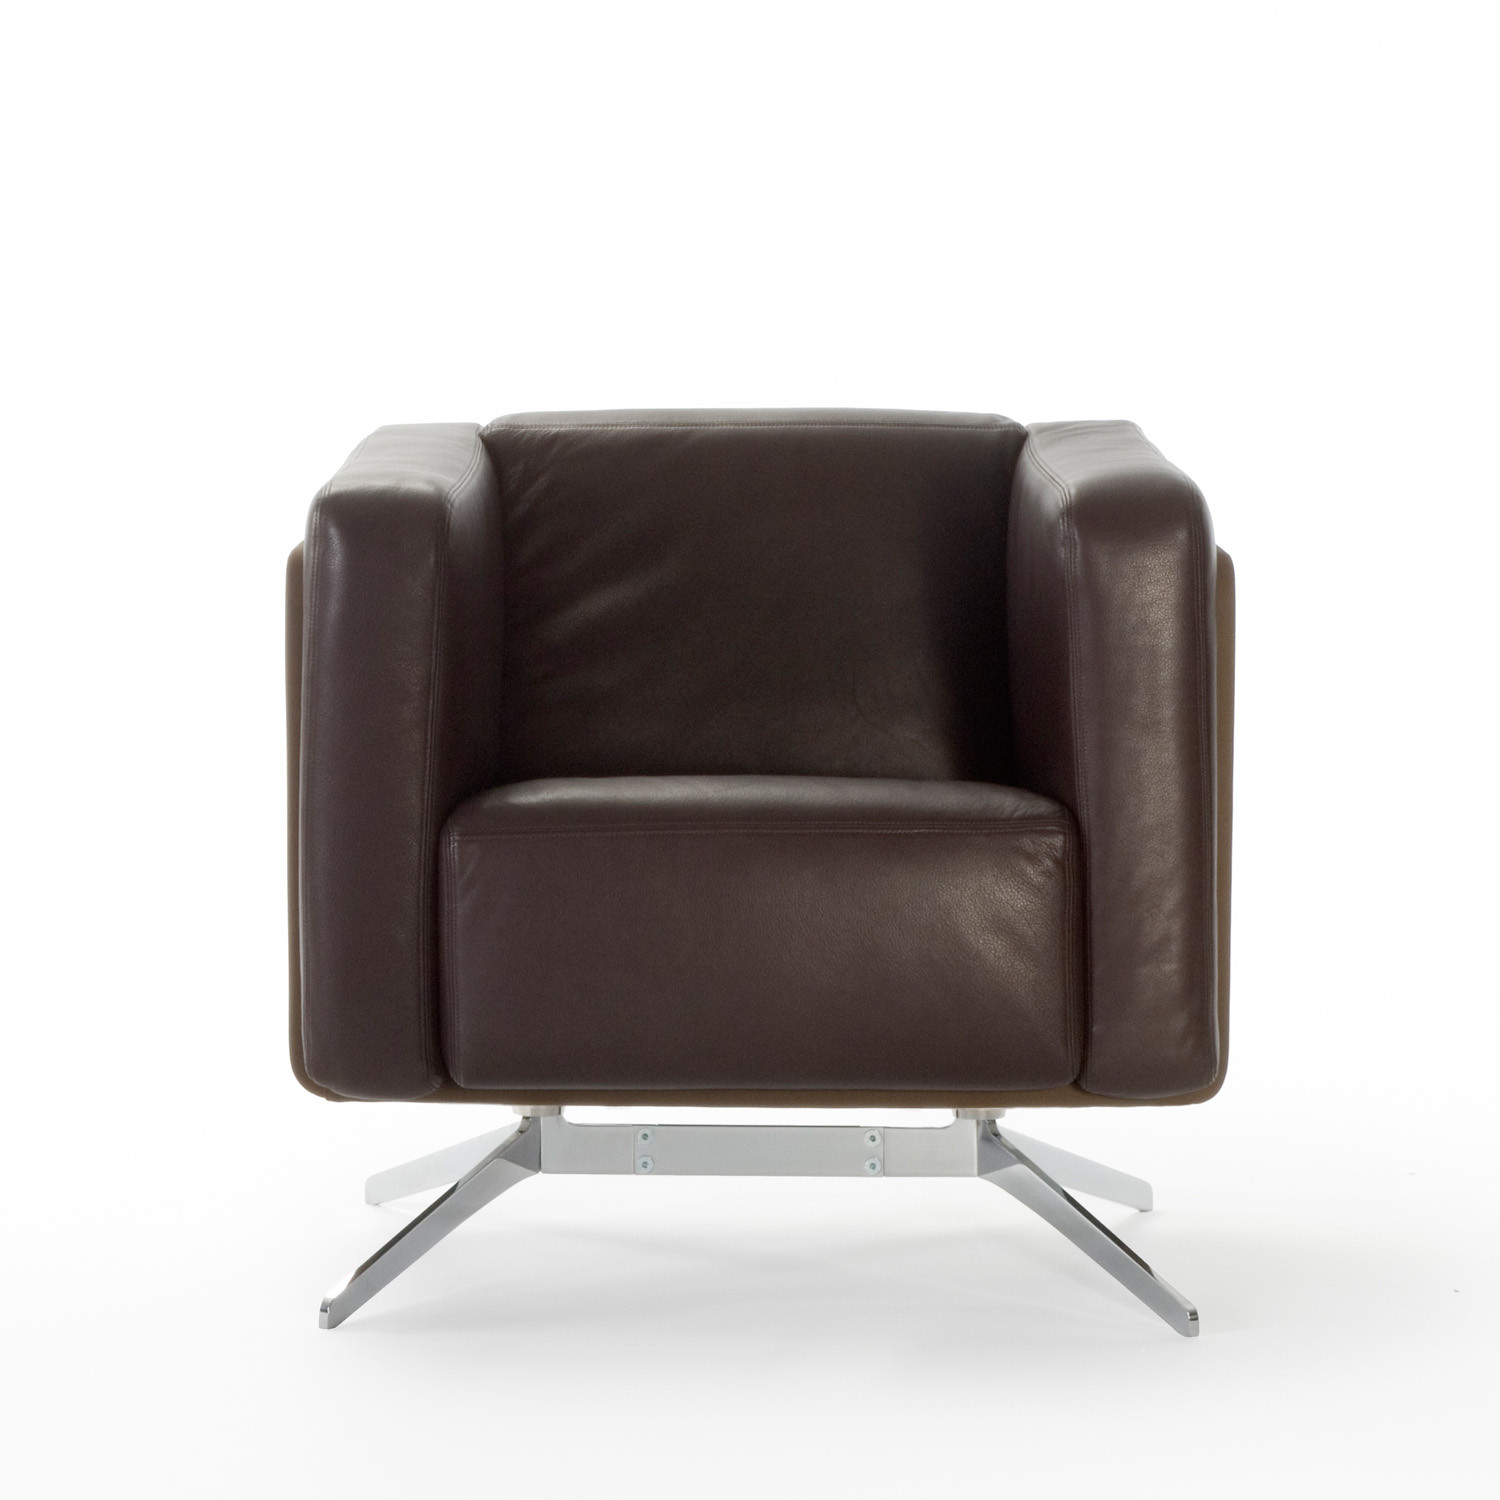 Coco Lounge Armchair by Apres